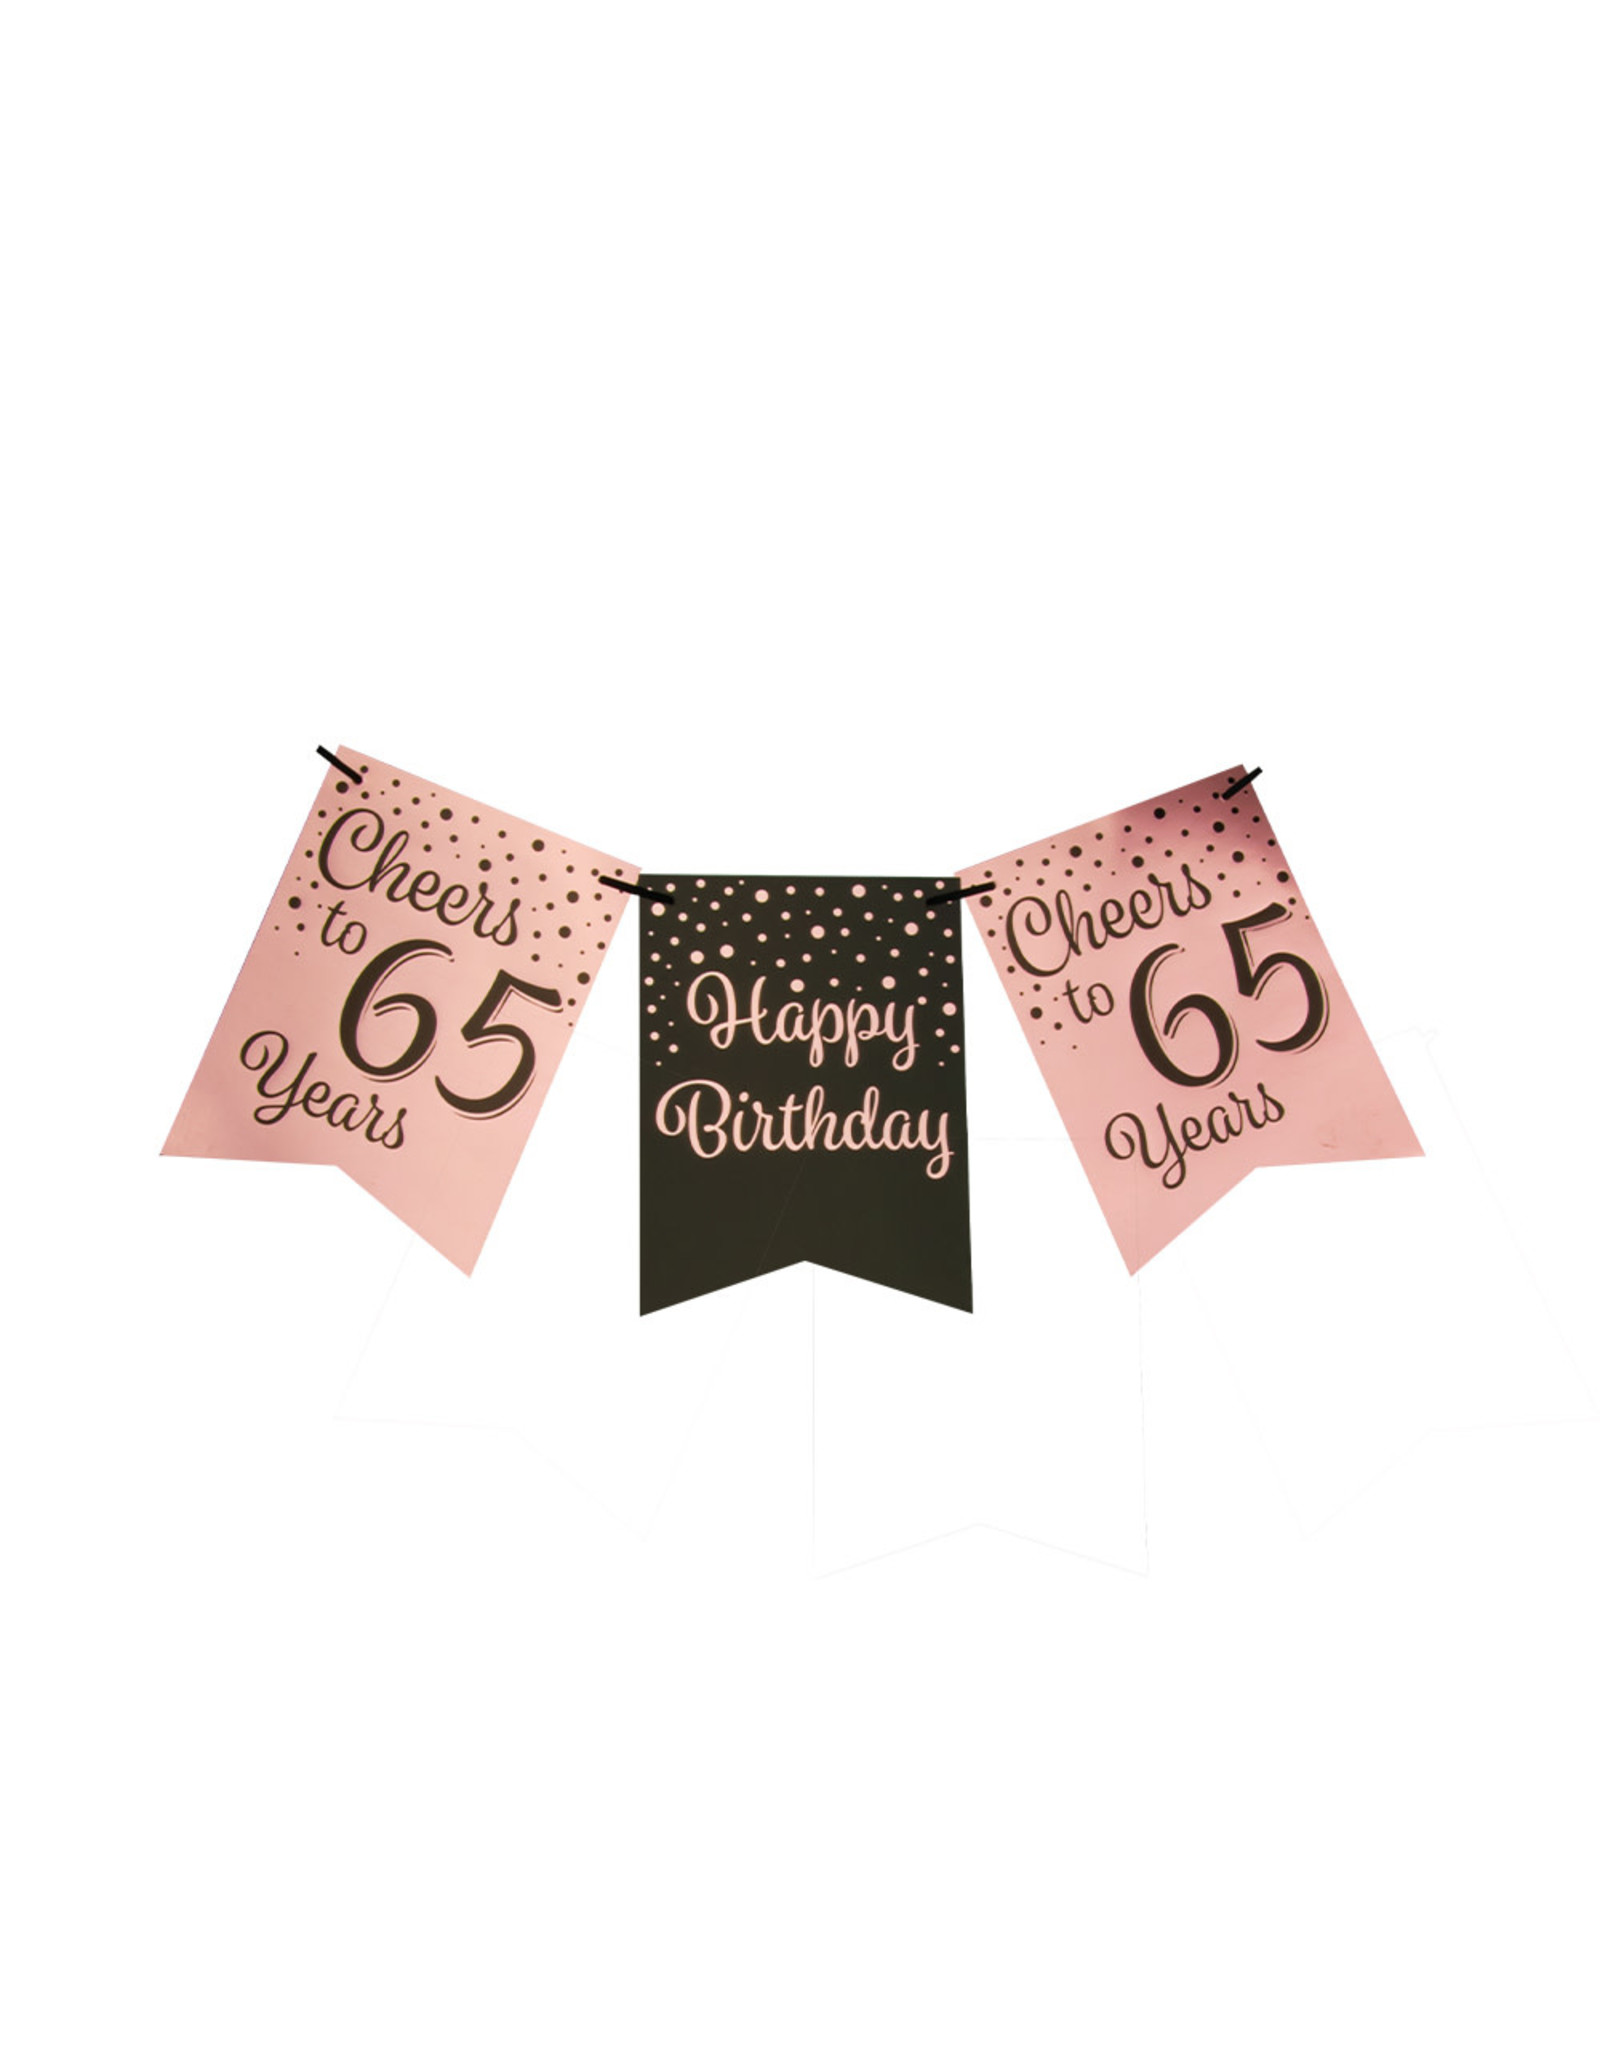 Party flag banner rose gold/black cheers to 65 years 6 meter